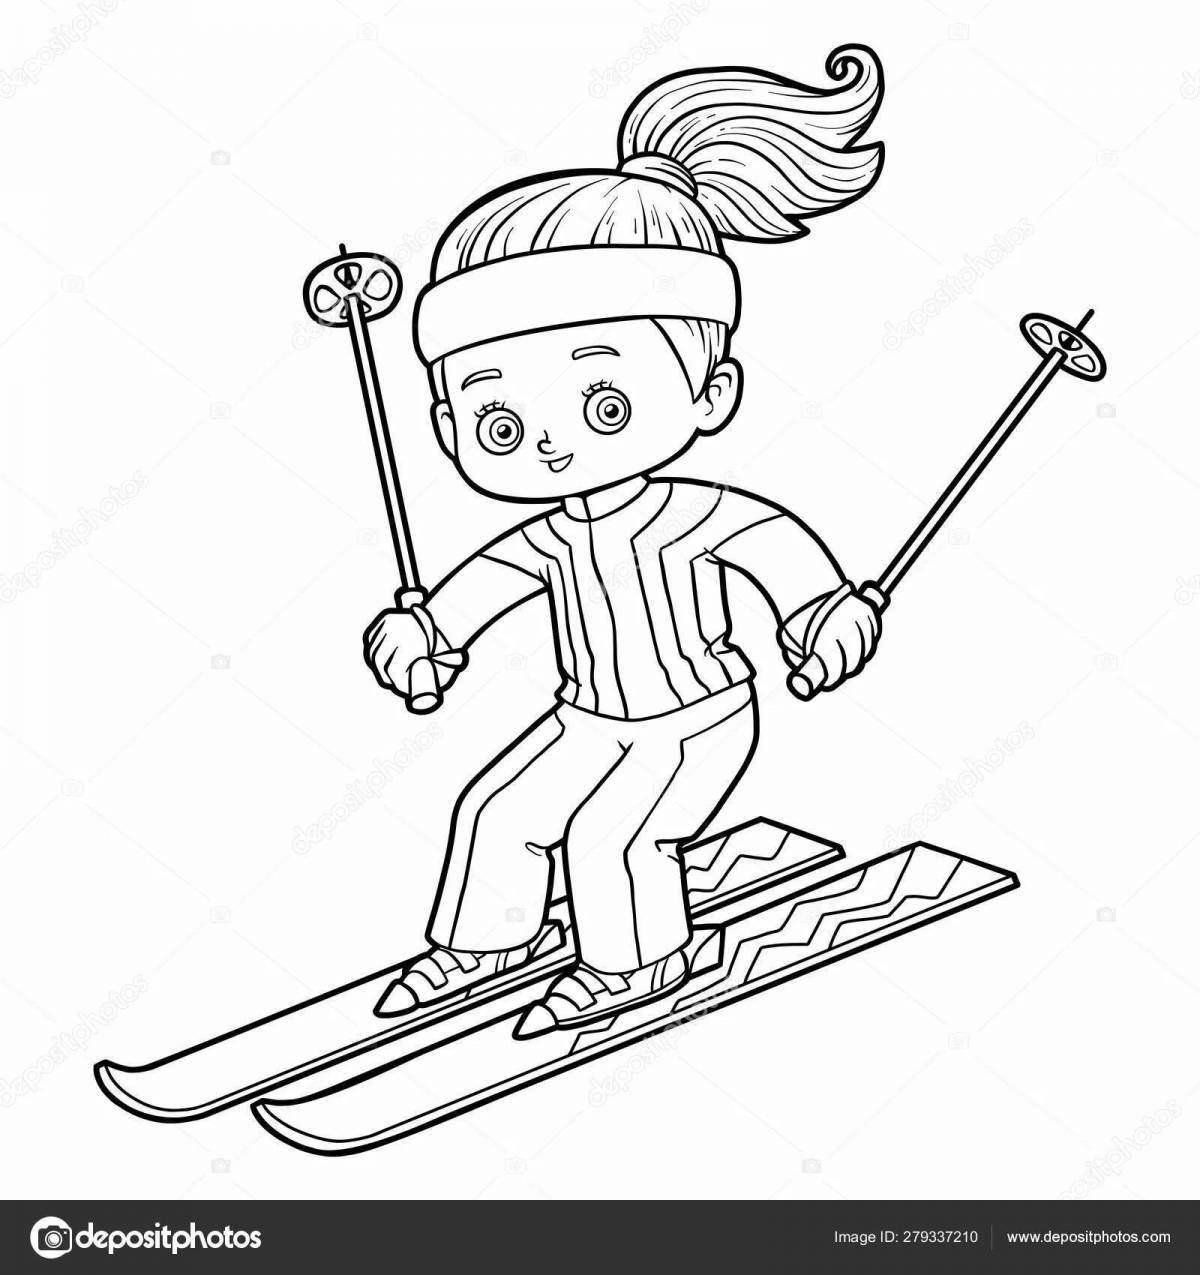 Animated skiing baby coloring page